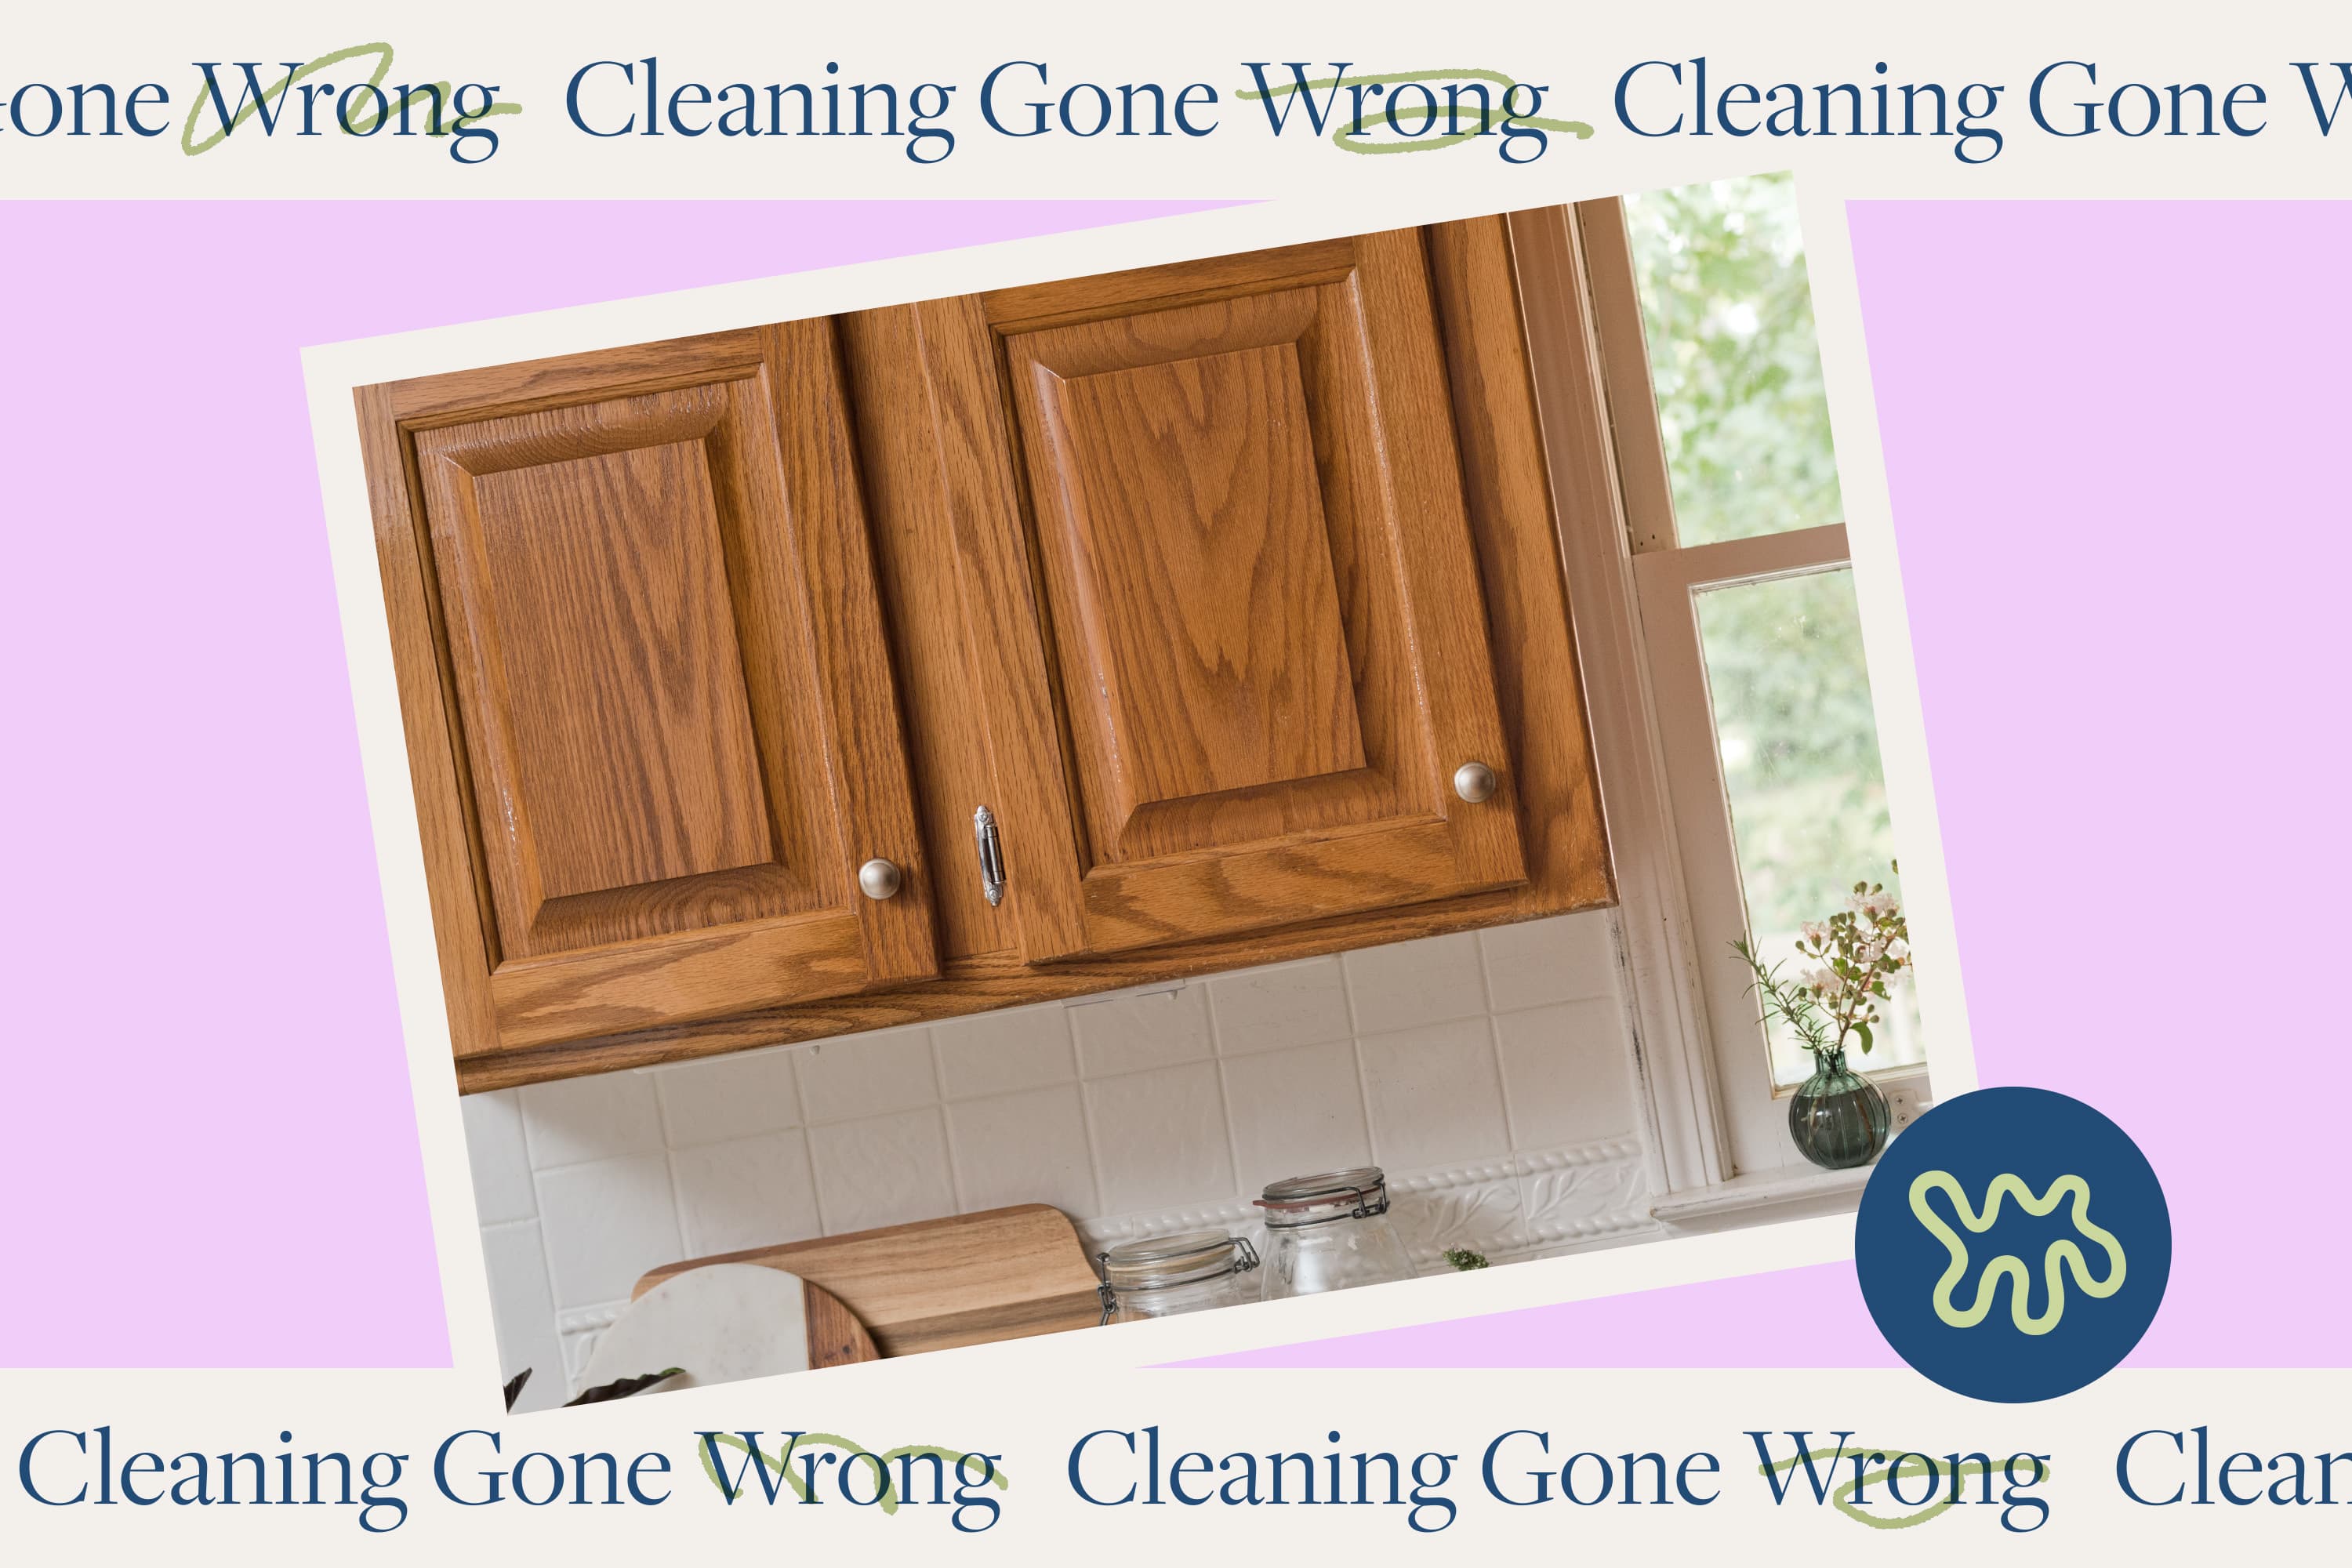 Cleaning Kitchen Cabinets - How To Clean Wood & Painted Cabinets